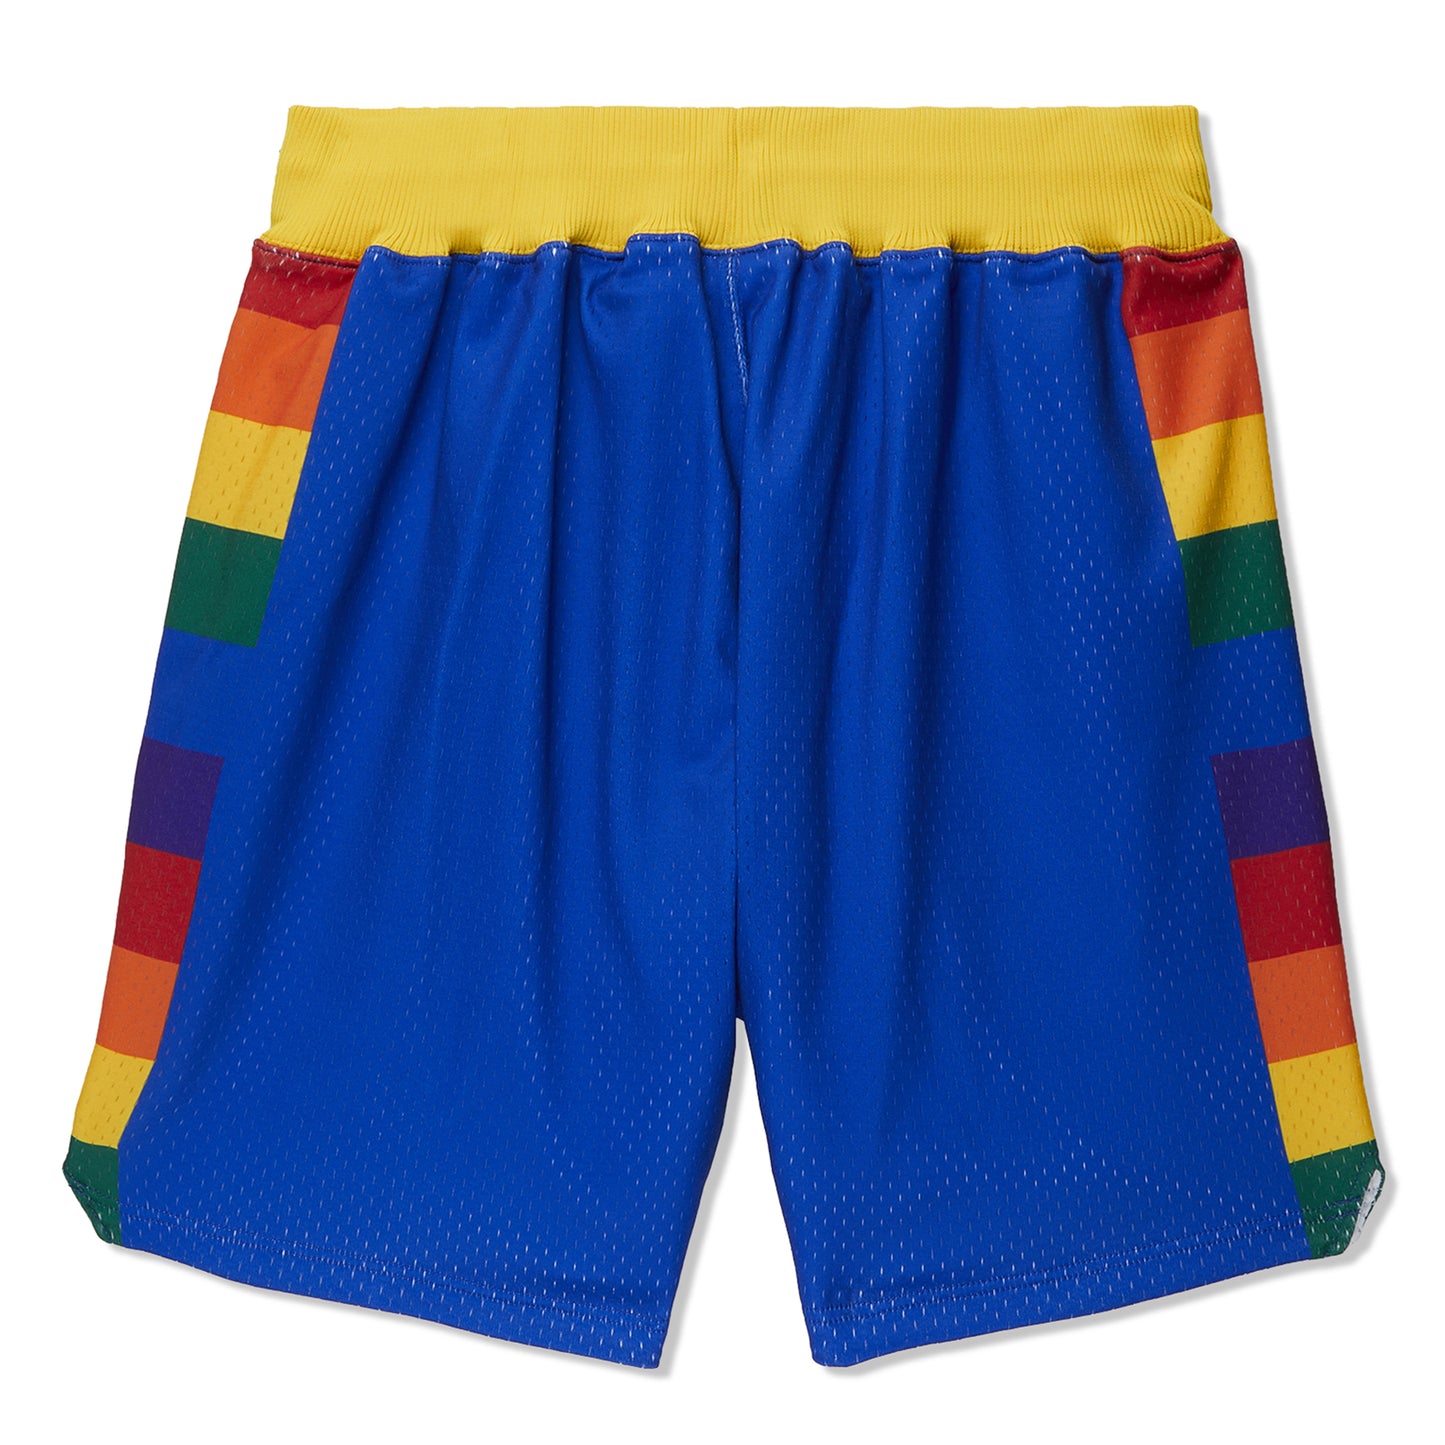 Mitchell & Ness Authentic Shorts  Denver Nuggets '91 (Blue)